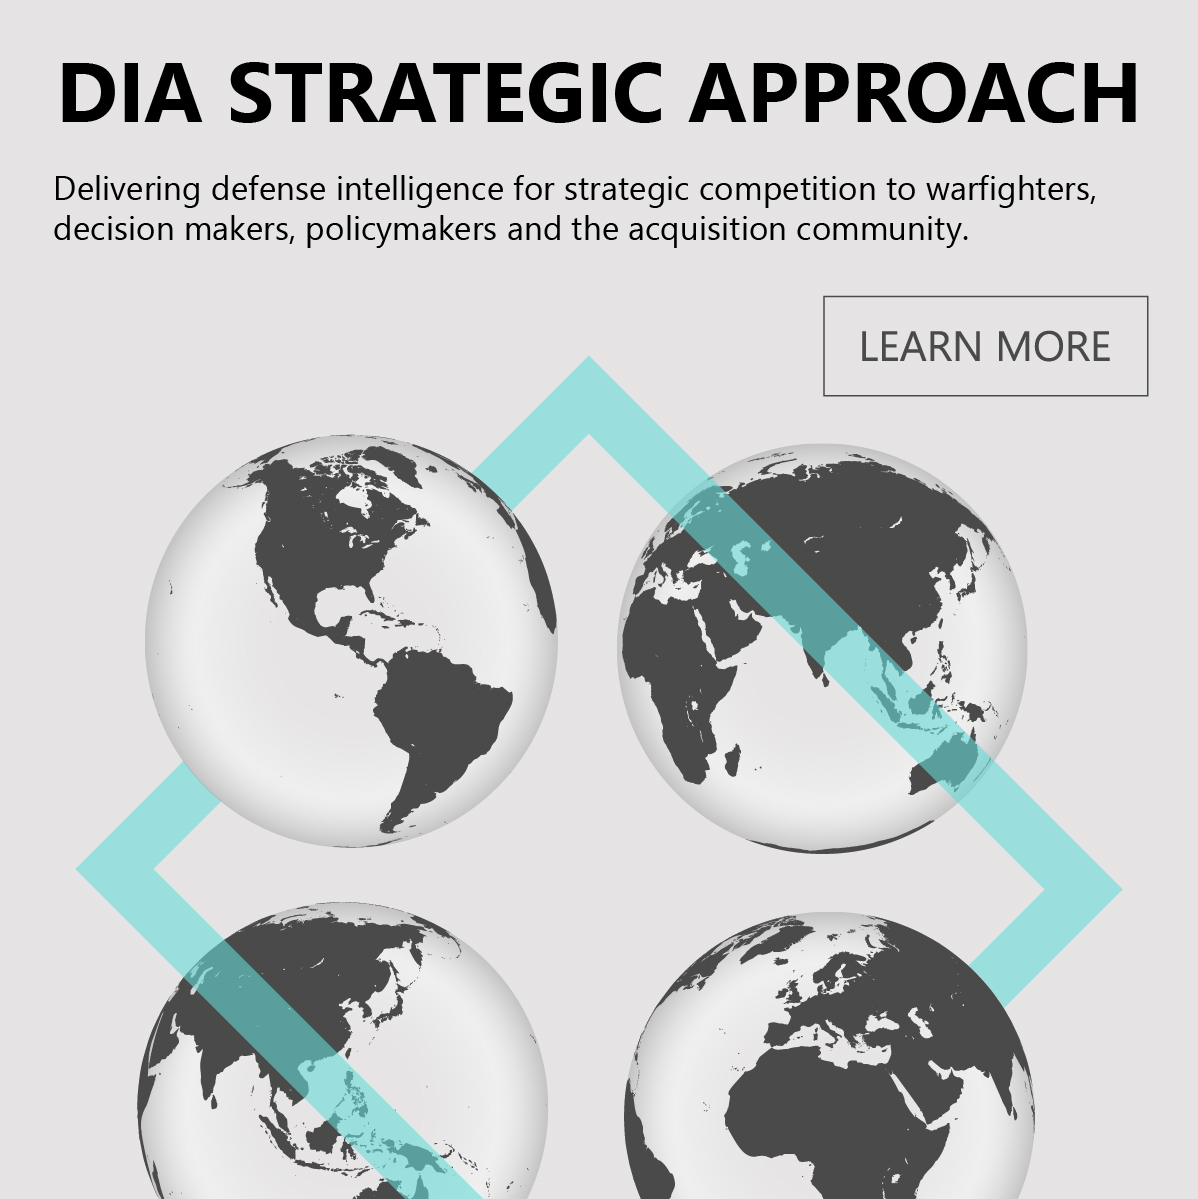 Feature graphic showing four interconnected globes. Main title. DIA strategic approach. Subtitle. Delivering defense intelligence for strategic competition to warfighters, decision makers, policymakers, and the acquisition community. For more information read DIA’s strategic approach. 